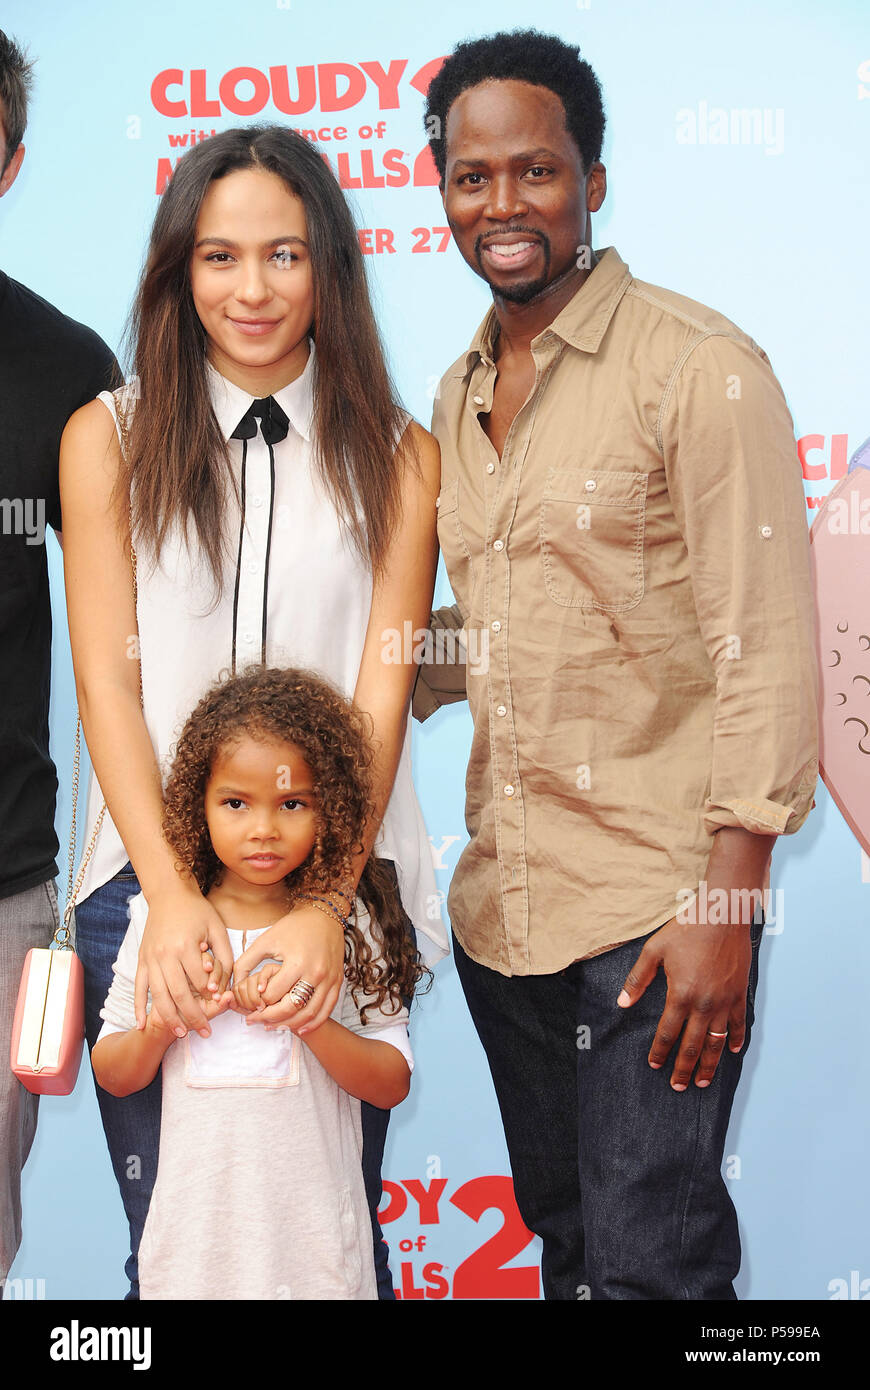 Harold Perrineau and daughters  at the Cloudy With a Chance of Meatball 2 Premiere at the Westwood Village Theatre in Los Angeles.Harold Perrineau and daughters 139 ------------- Red Carpet Event, Vertical, USA, Film Industry, Celebrities,  Photography, Bestof, Arts Culture and Entertainment, Topix Celebrities fashion /  Vertical, Best of, Event in Hollywood Life - California,  Red Carpet and backstage, USA, Film Industry, Celebrities,  movie celebrities, TV celebrities, Music celebrities, Photography, Bestof, Arts Culture and Entertainment,  Topix, vertical,  family from from the year , 2013, Stock Photo